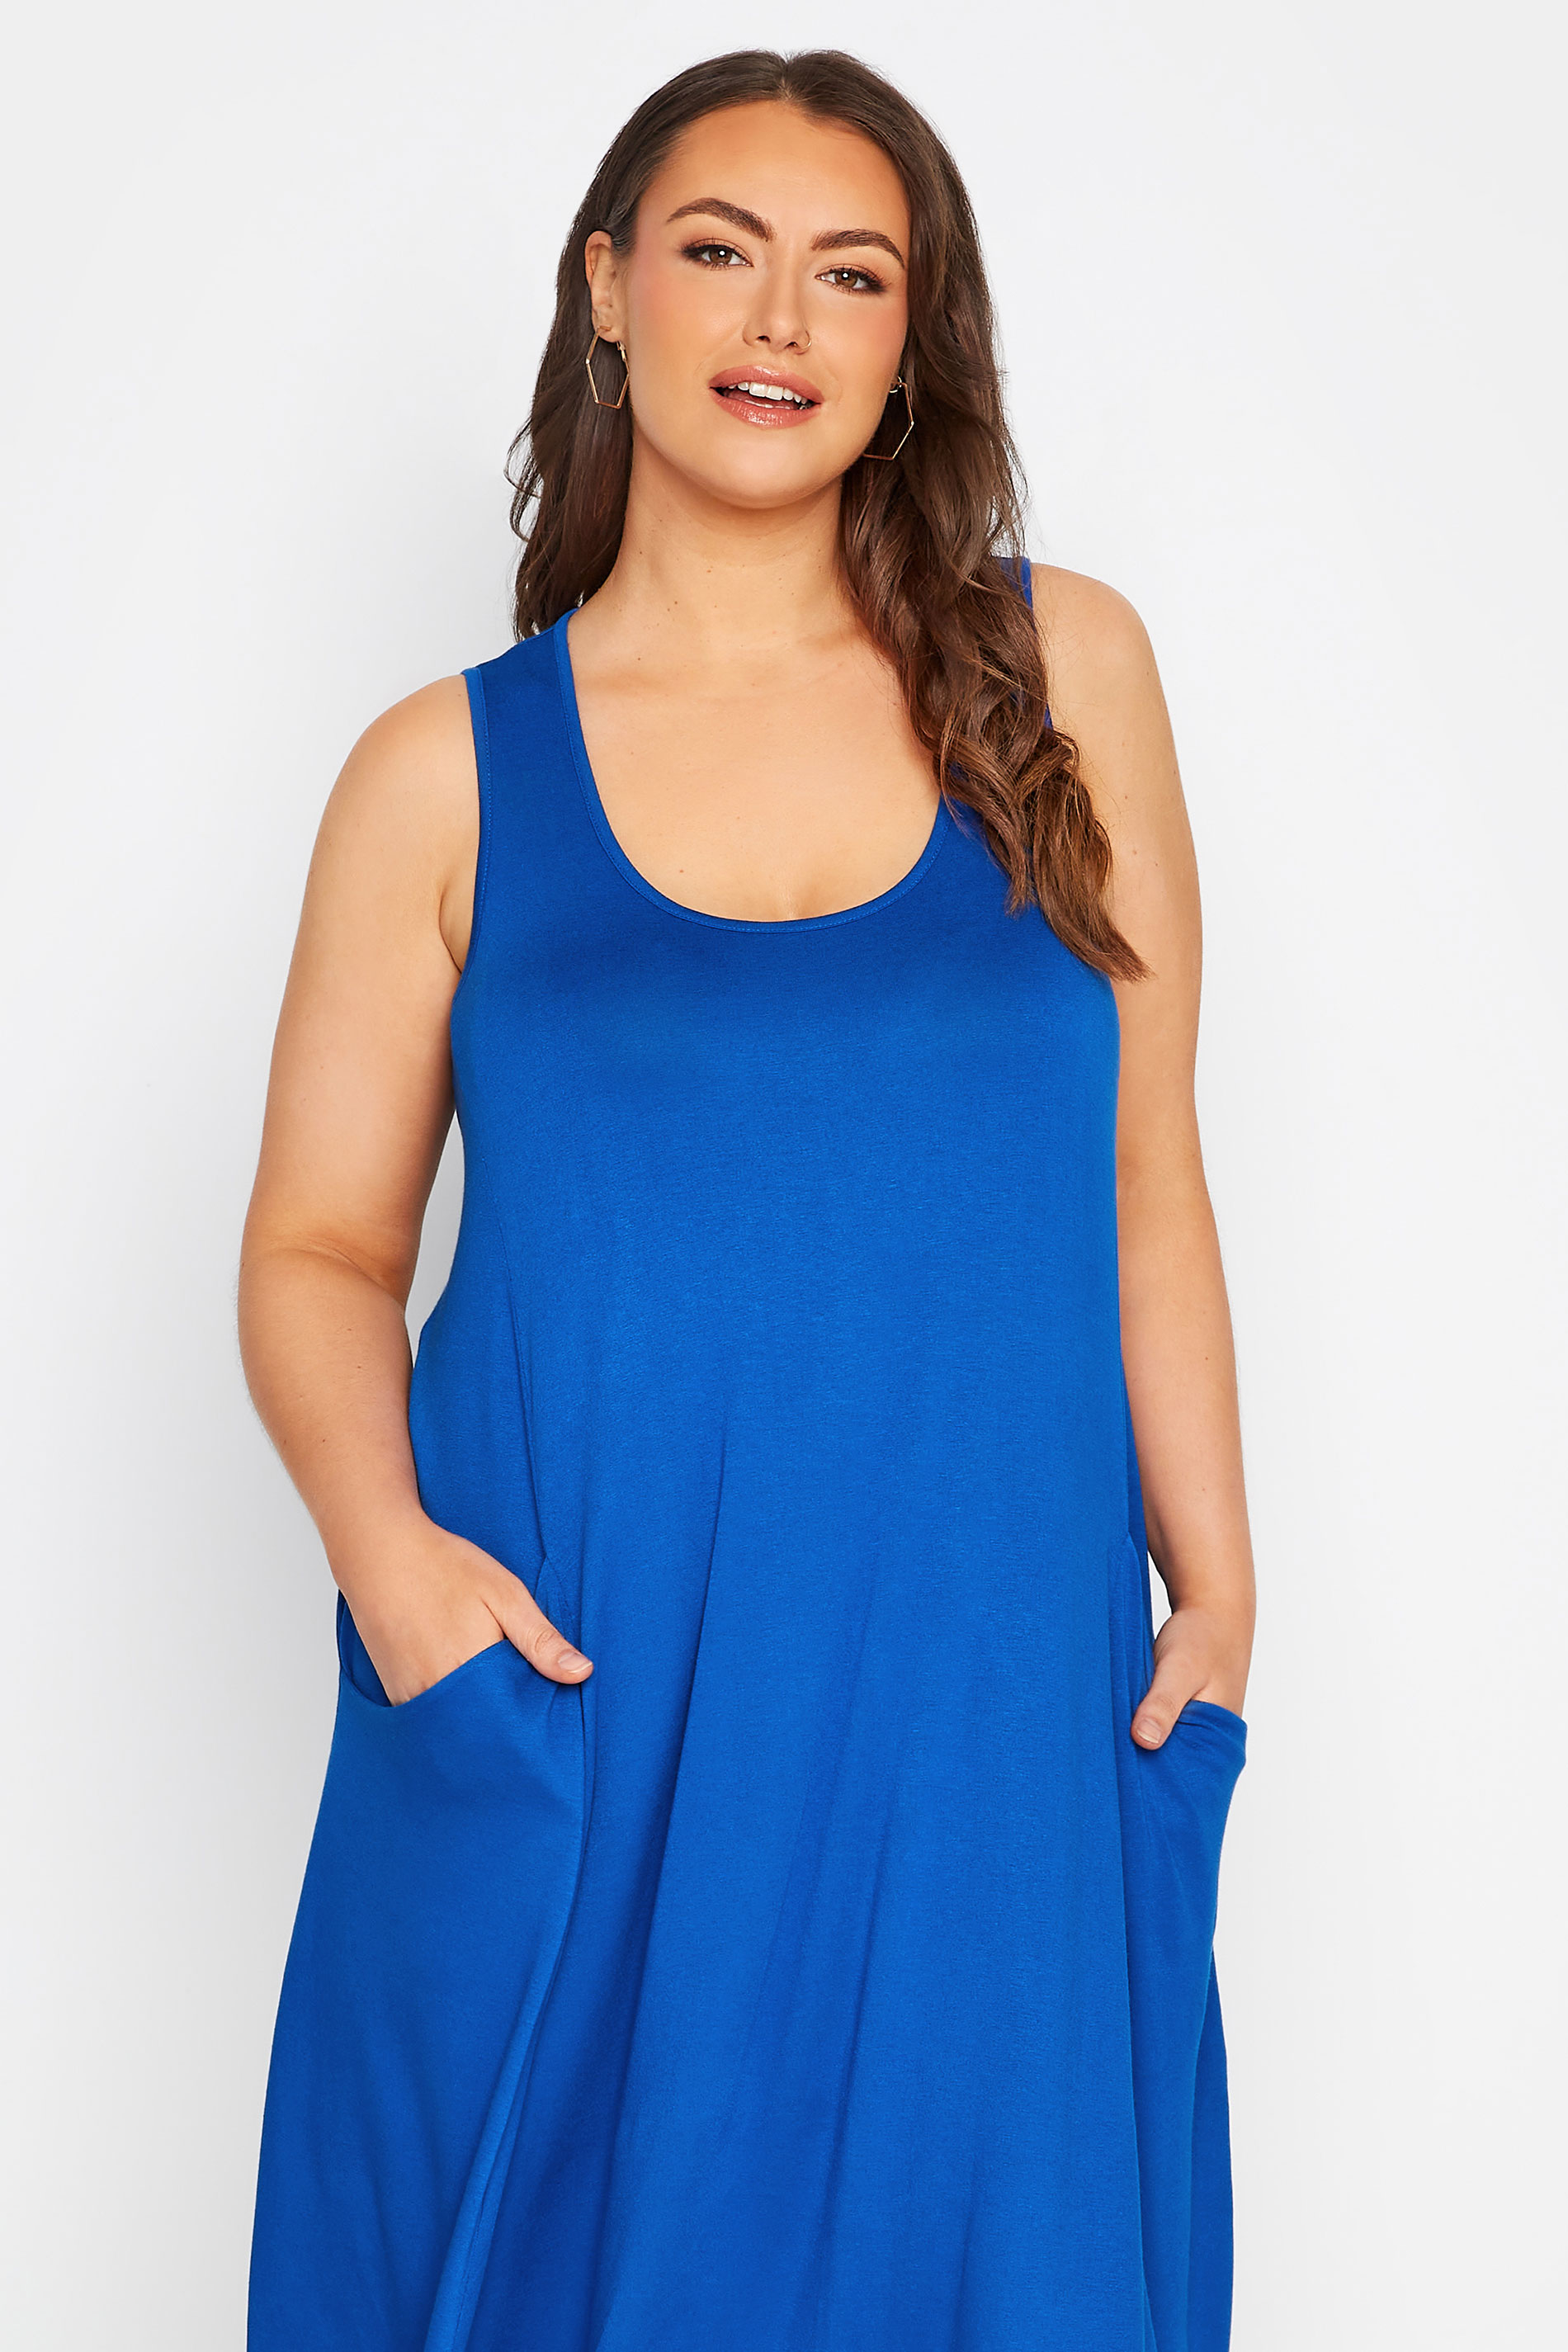 Robes Grande Taille Grande taille  Robes Casual | Robe Bleue Roi sans Manches Midi en Jersey à Poches - JR85688